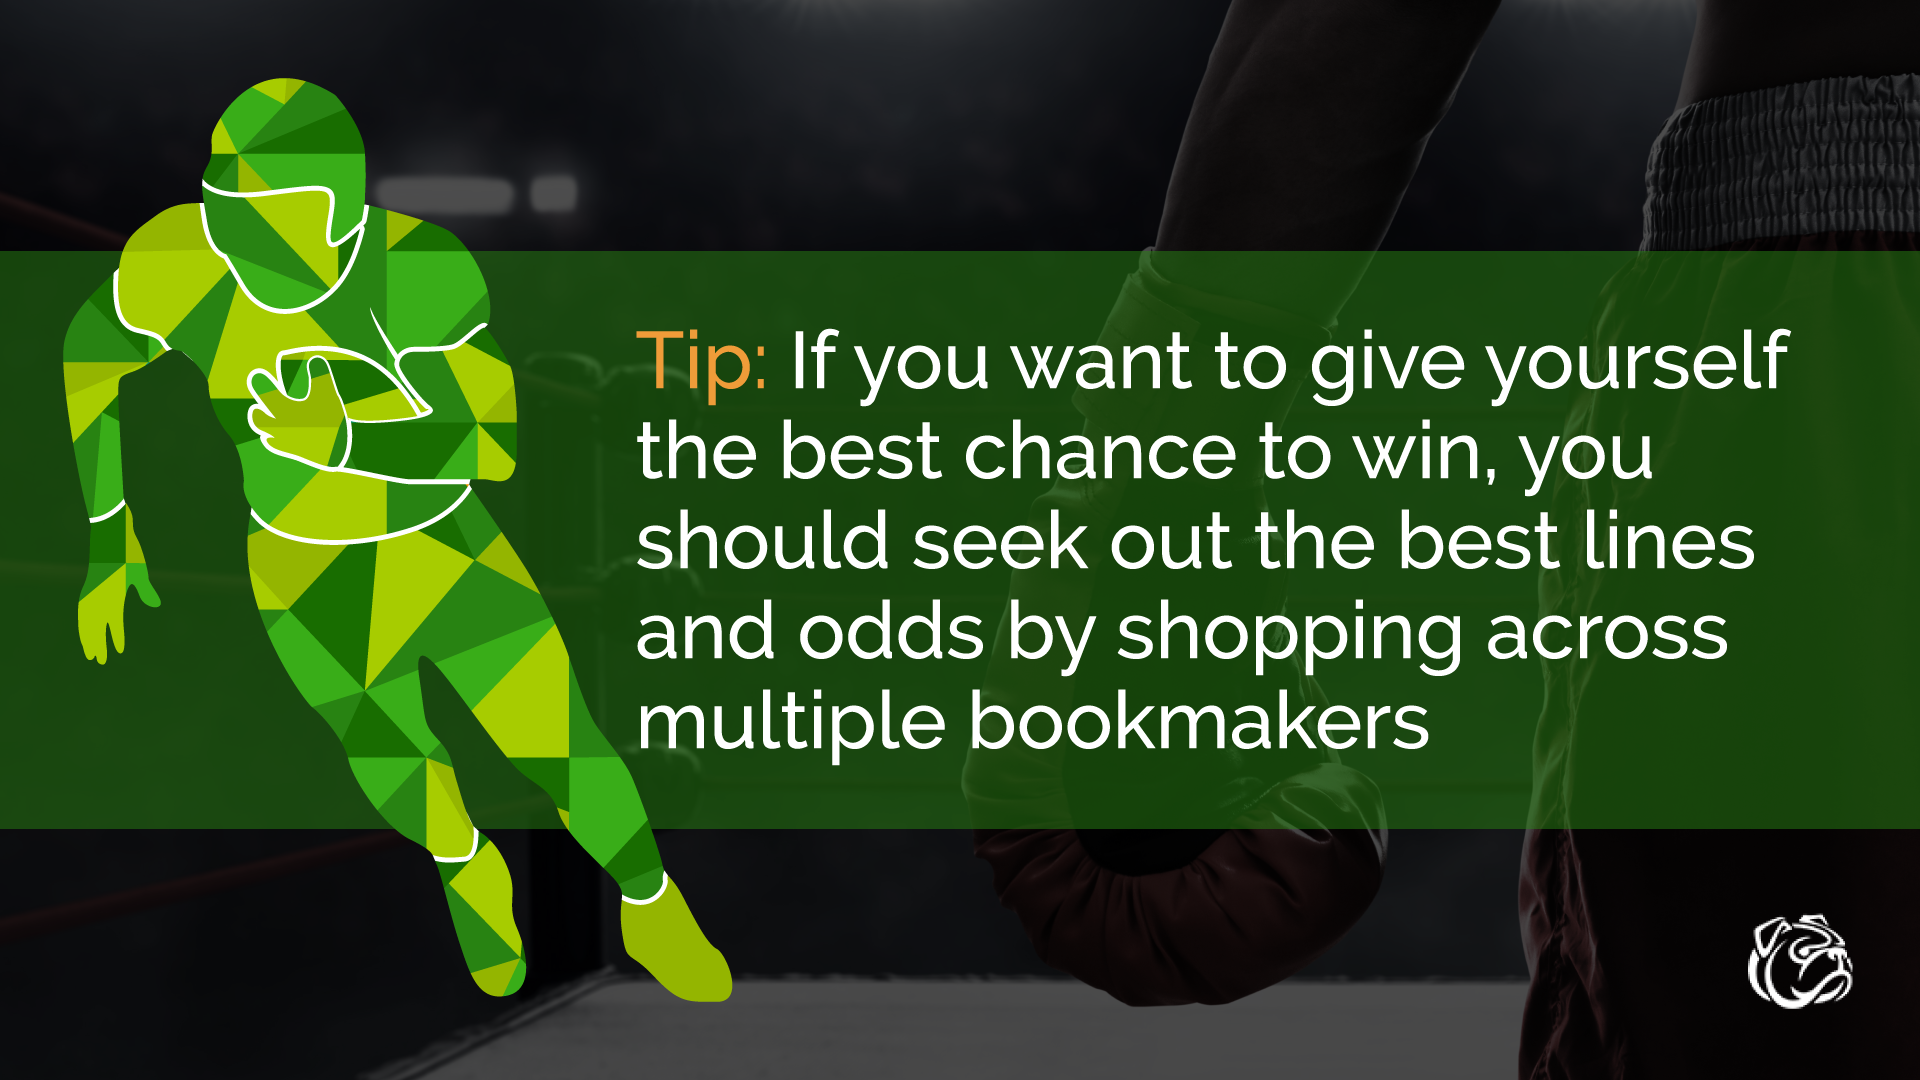 How to Win Betting on Sports - Sports Betting Tips to Win More